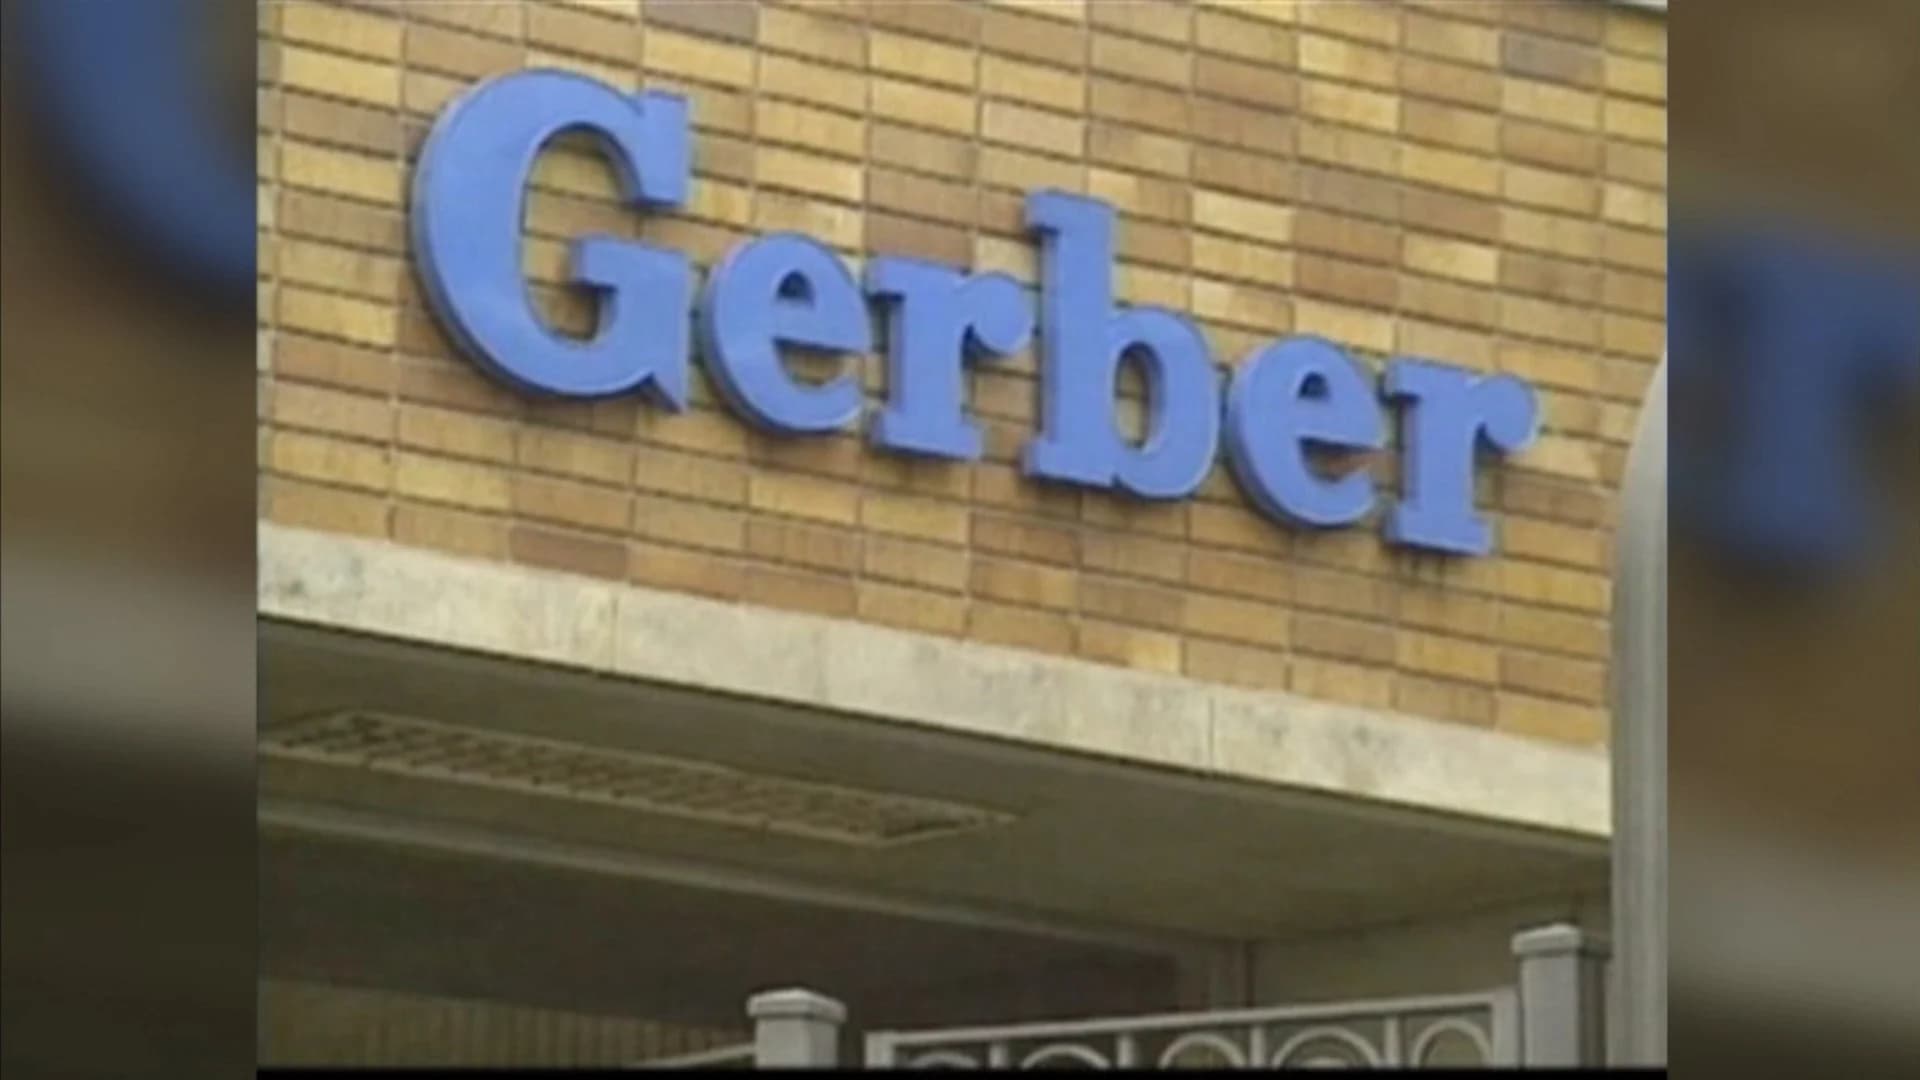 Gerber moving corporate headquarters from Florham Park to Virginia